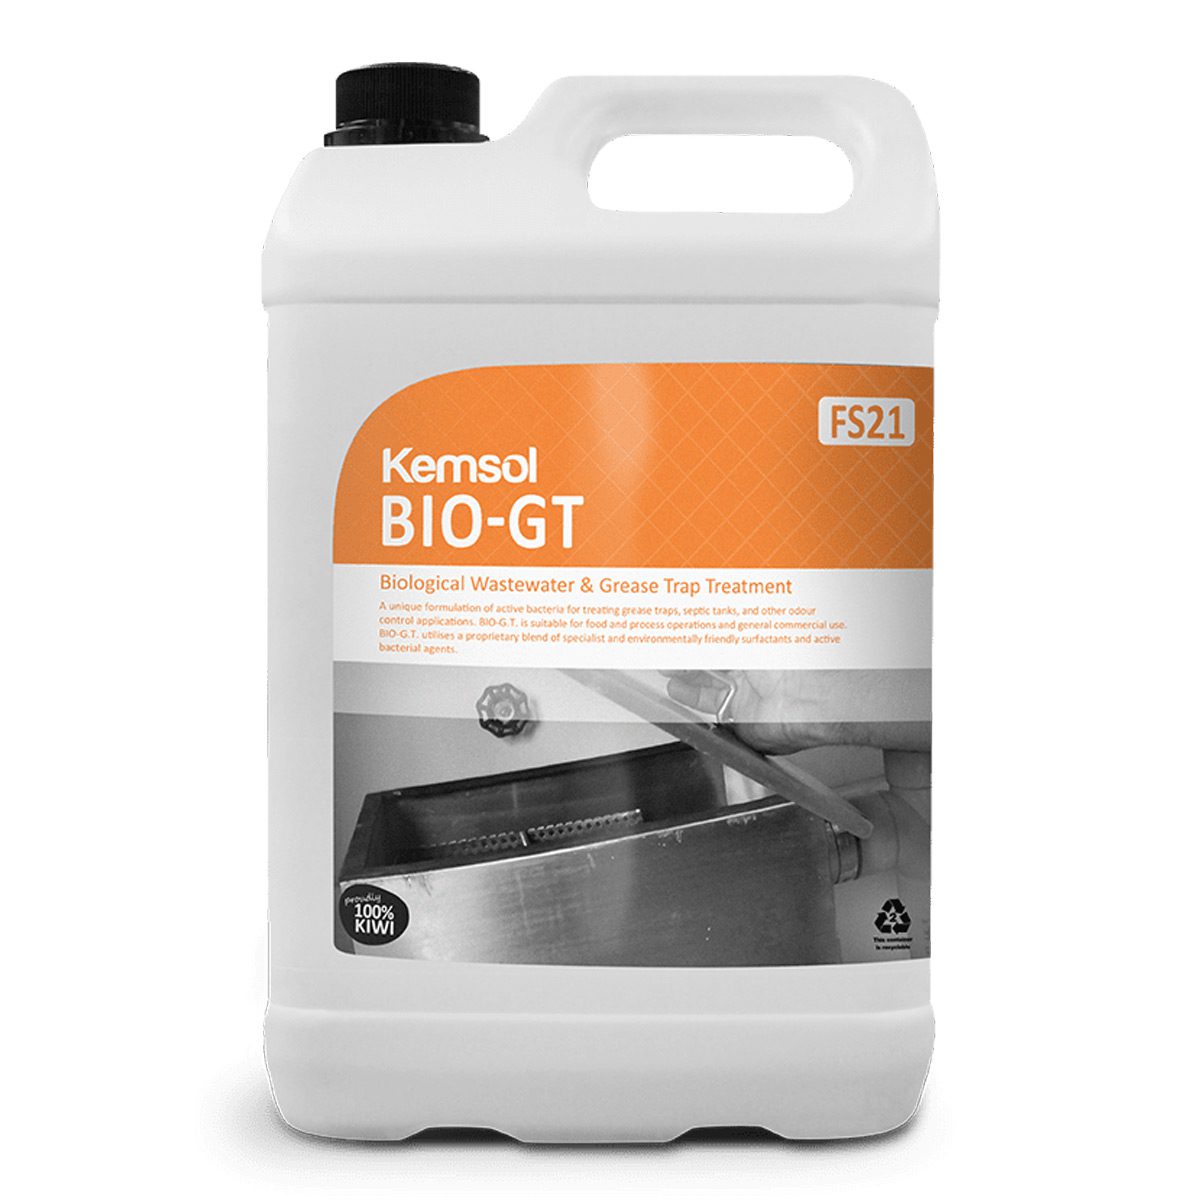 cleaning-products-industrial-specialist-bio-gt-5L-litre-active-bacteria-for-treating-grease-traps-septic-tanks-odour-control-applications-food-process-operations-vjs-distributors-KBIOGT